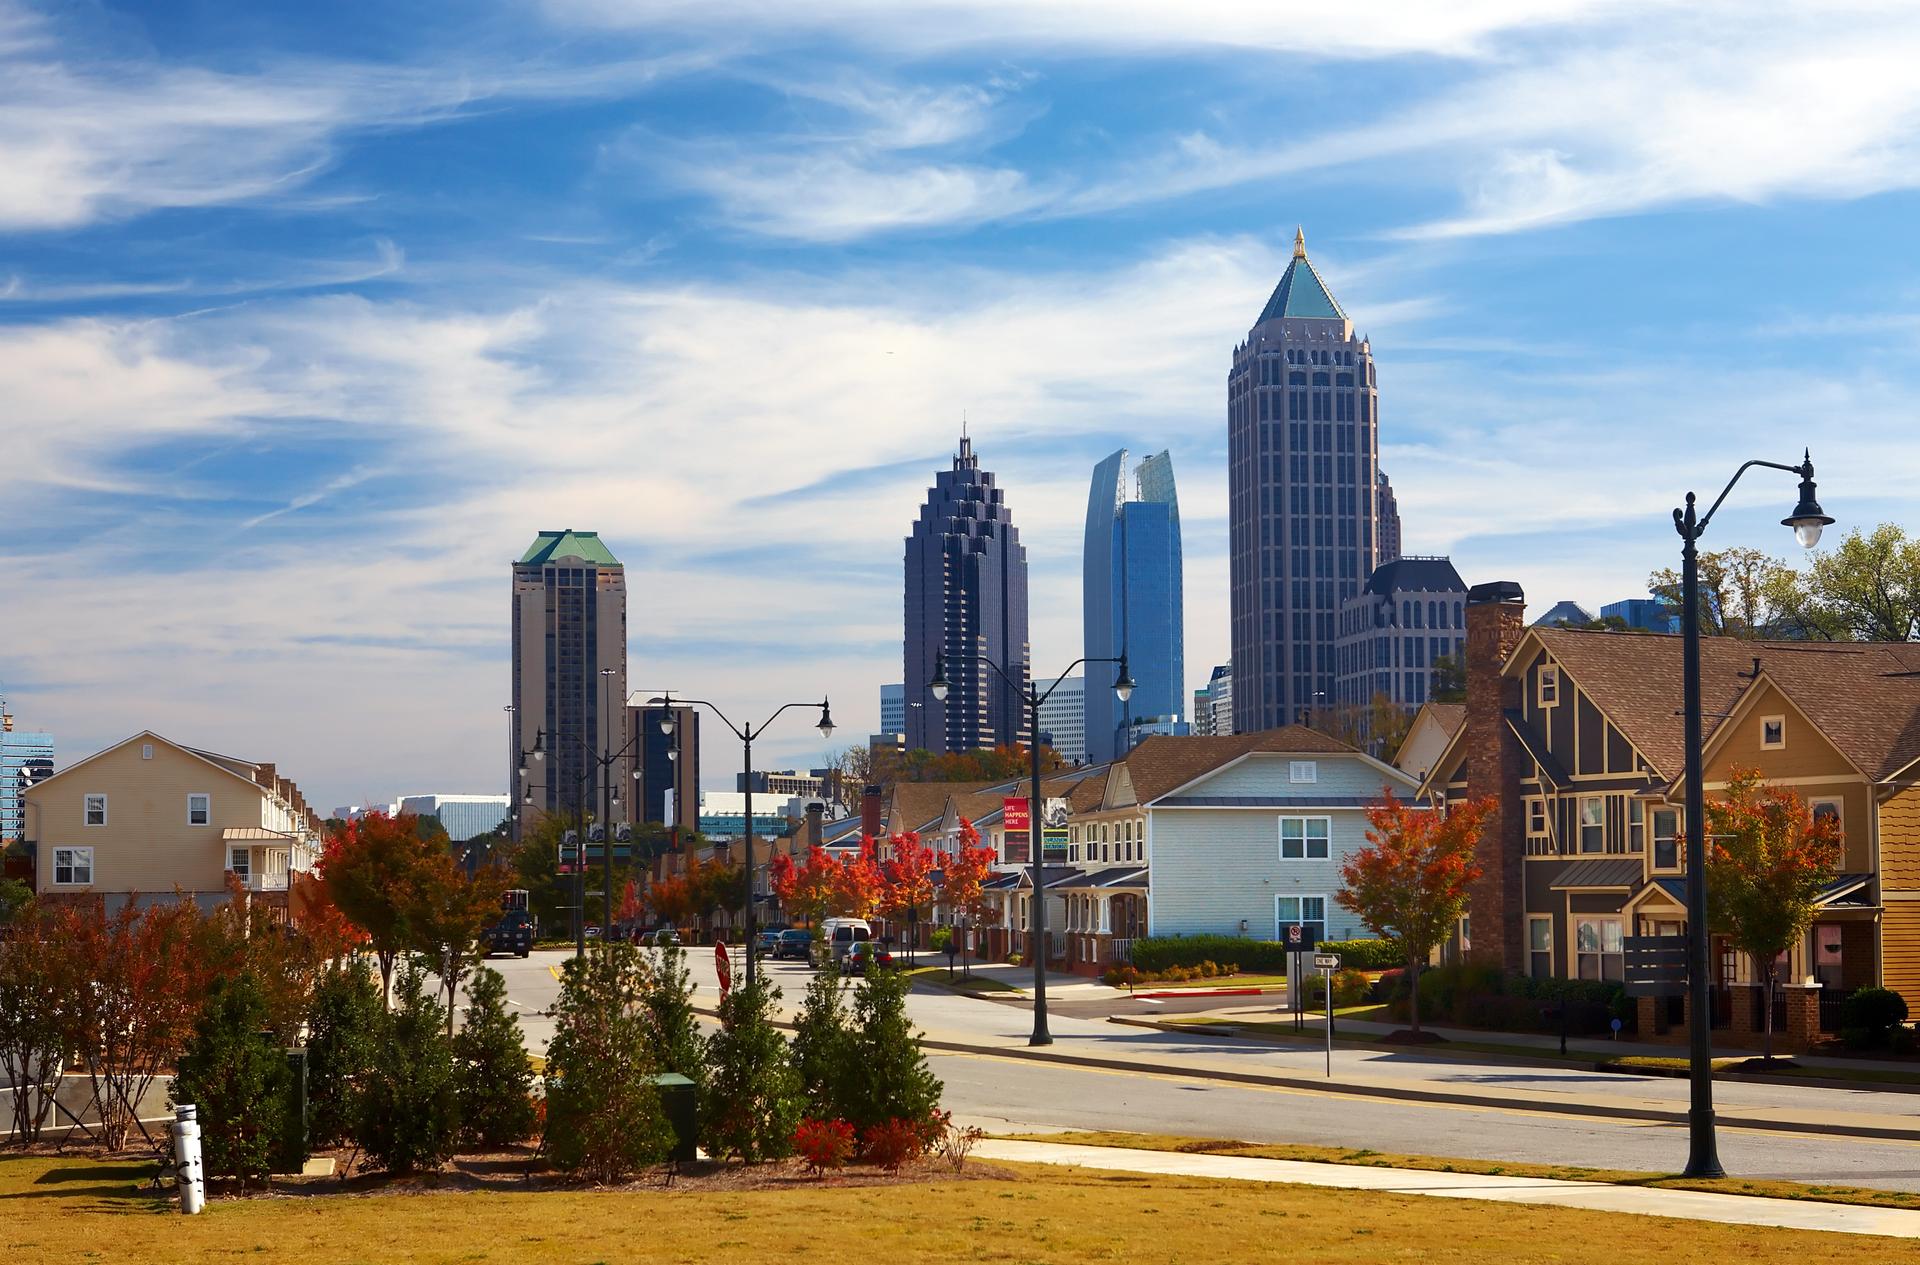 How to Find Affordable Housing in Atlanta